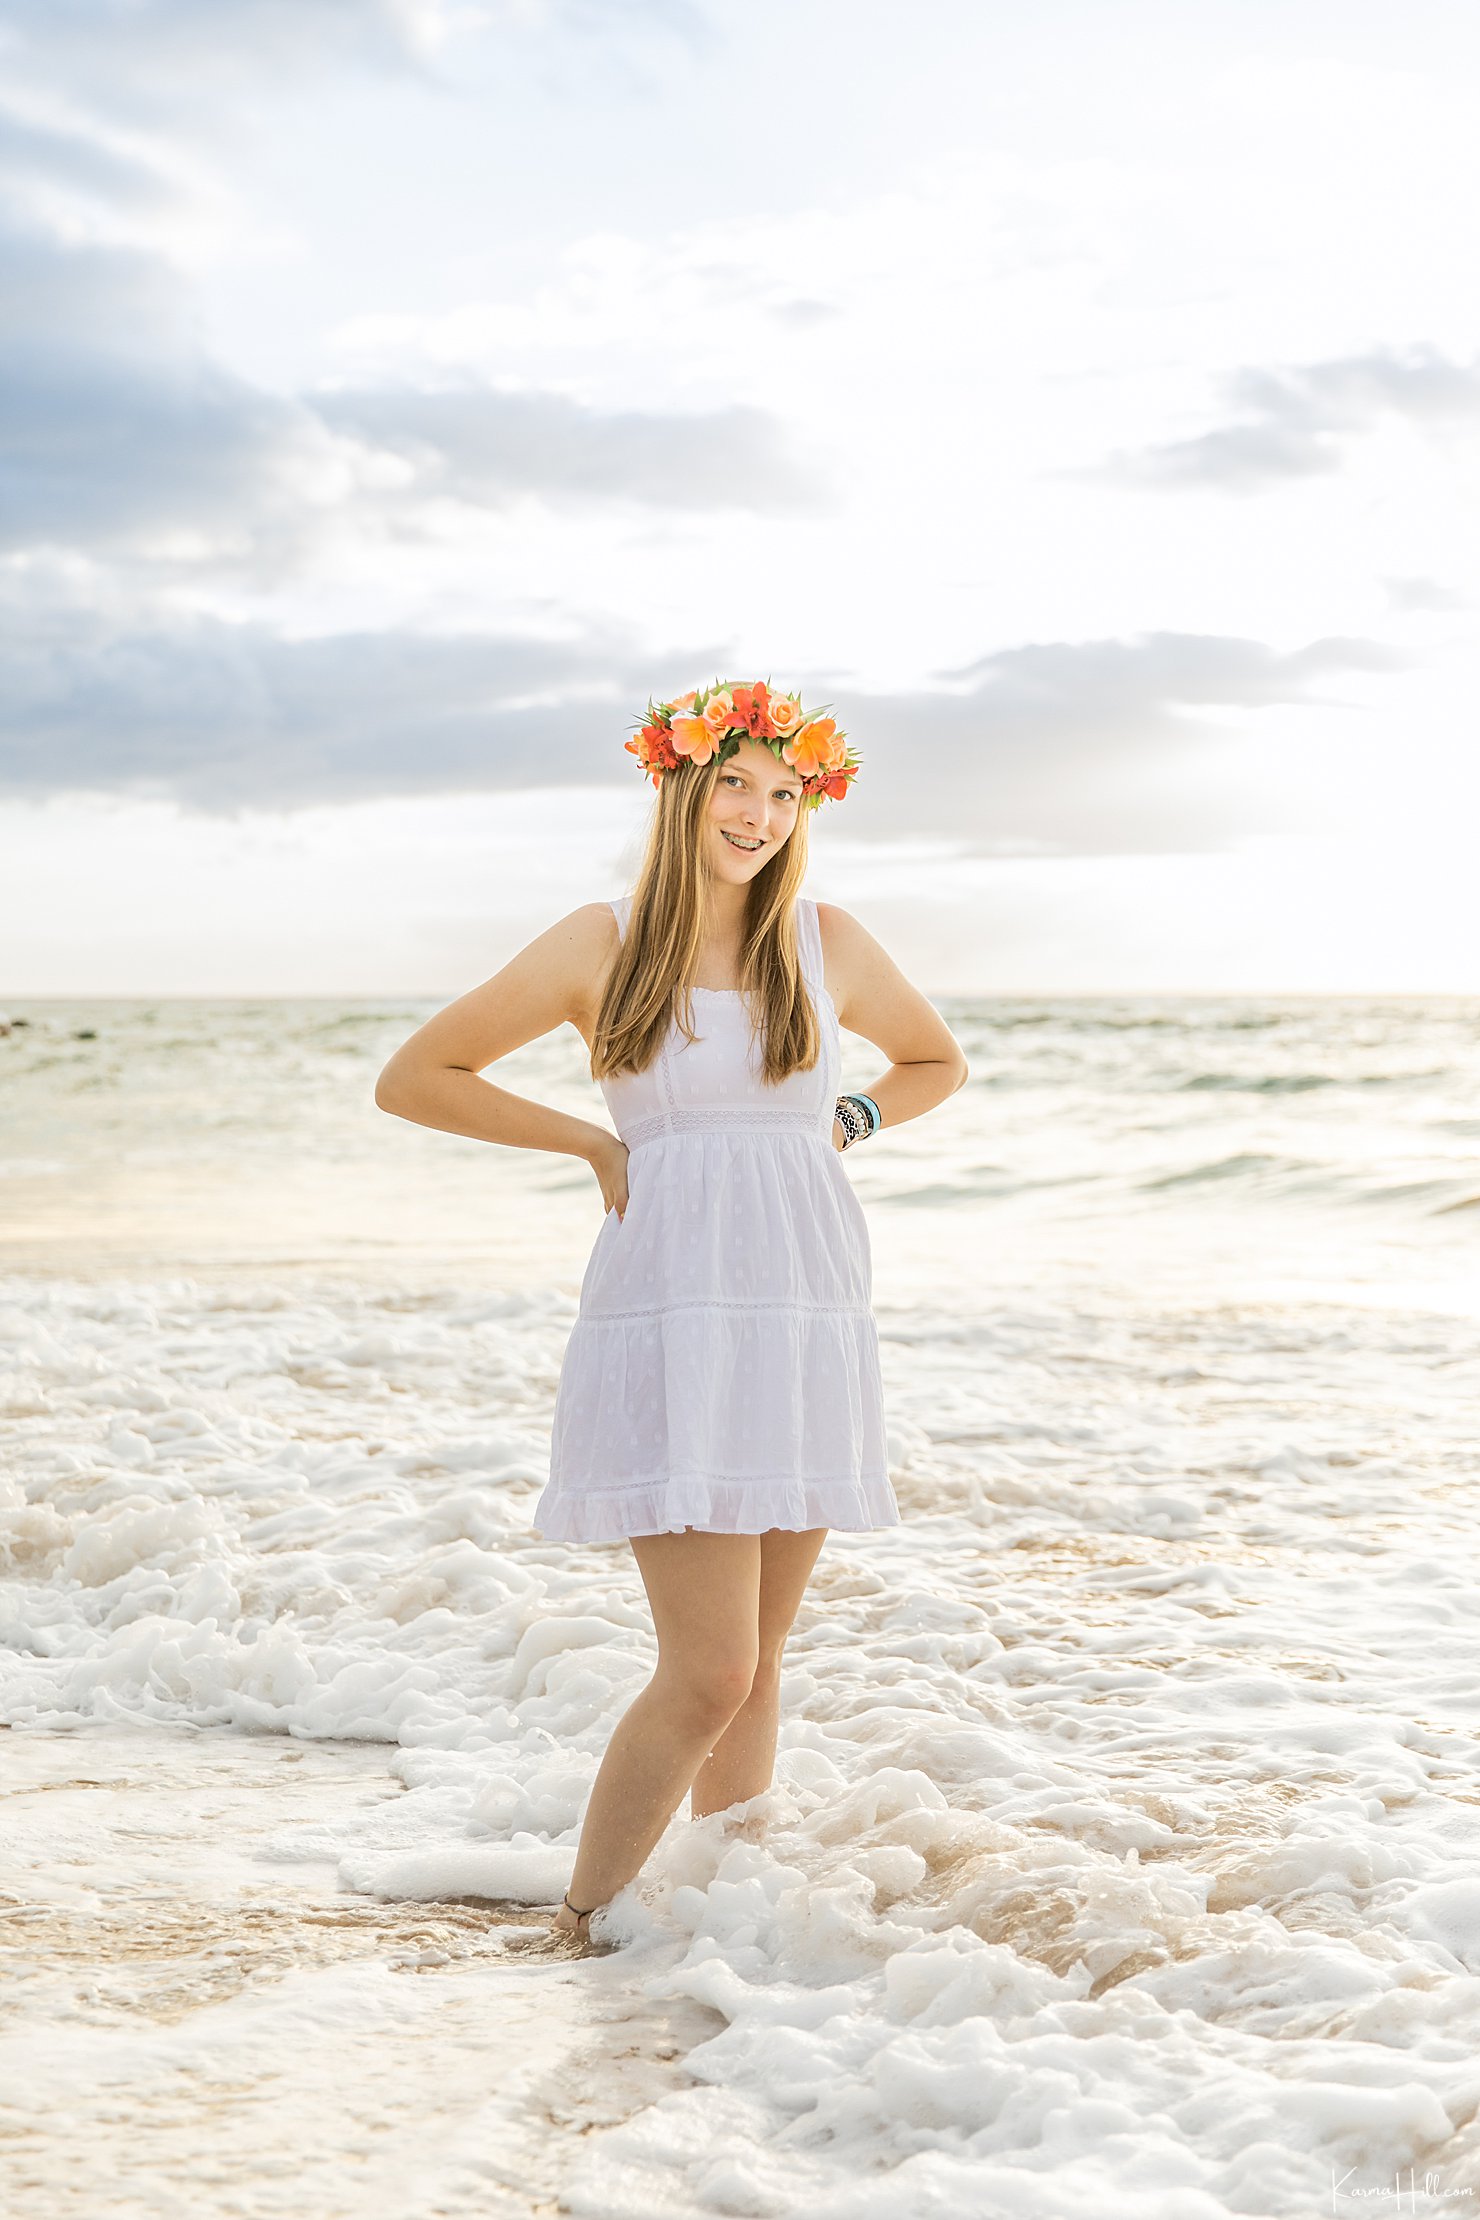 Teen photography in Maui